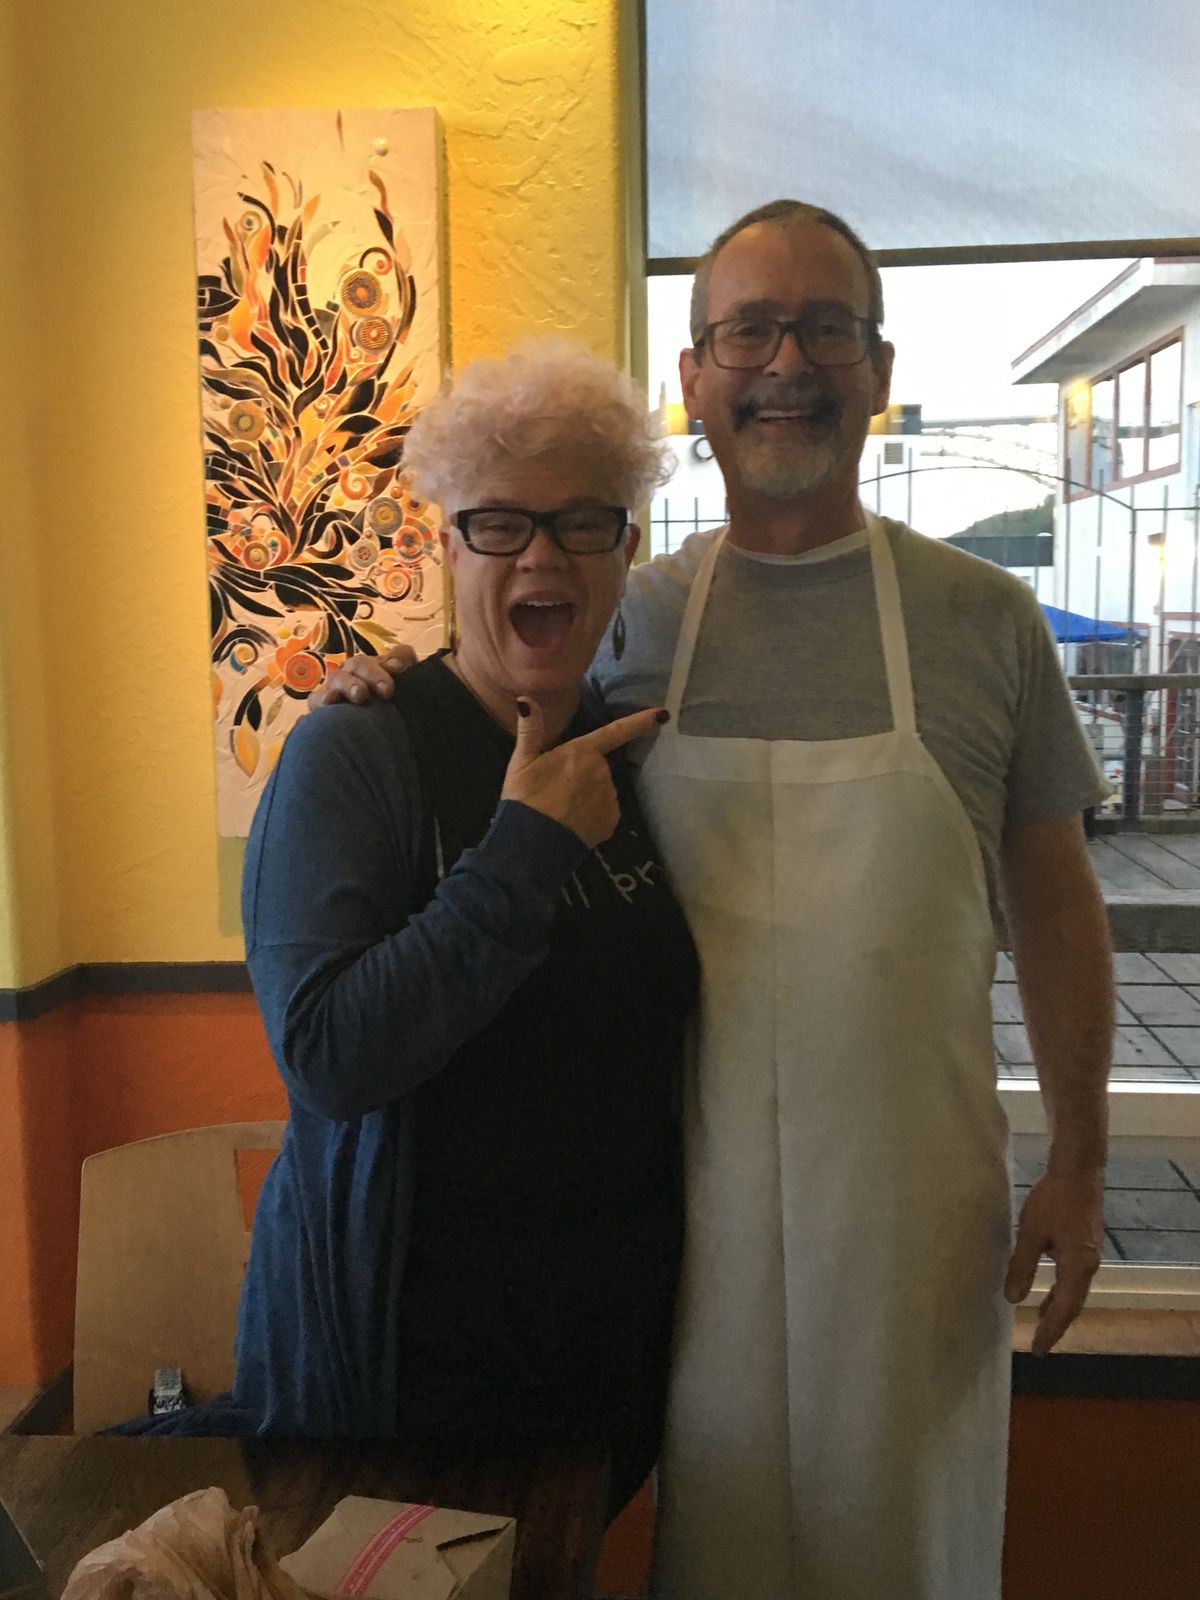 Leslie Kelly and chef Michael Waliser, former Spokane resident, who has been cooking on the waterfront in Newport, Oregon for the past 16 years.